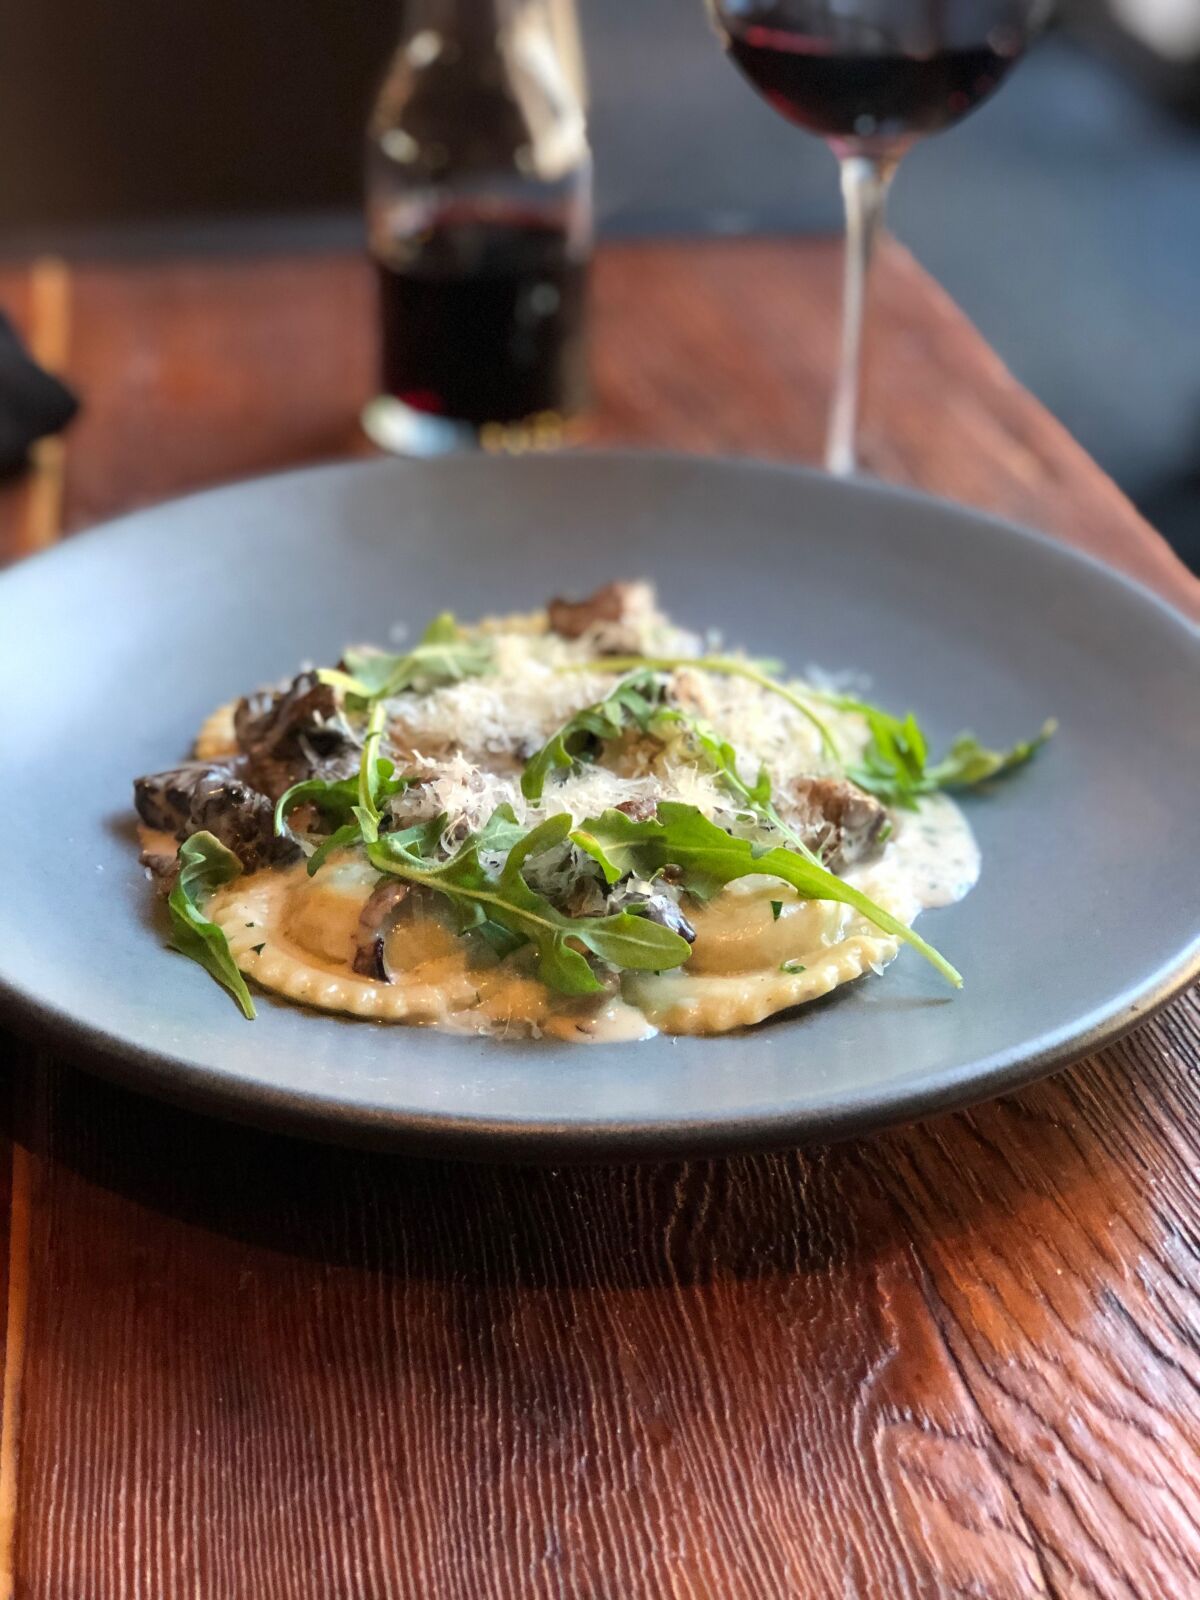 Bankers Hill Bar + Restaurant will fill the hearts, and stomachs, of ravioli lovers on National Ravioli Day.